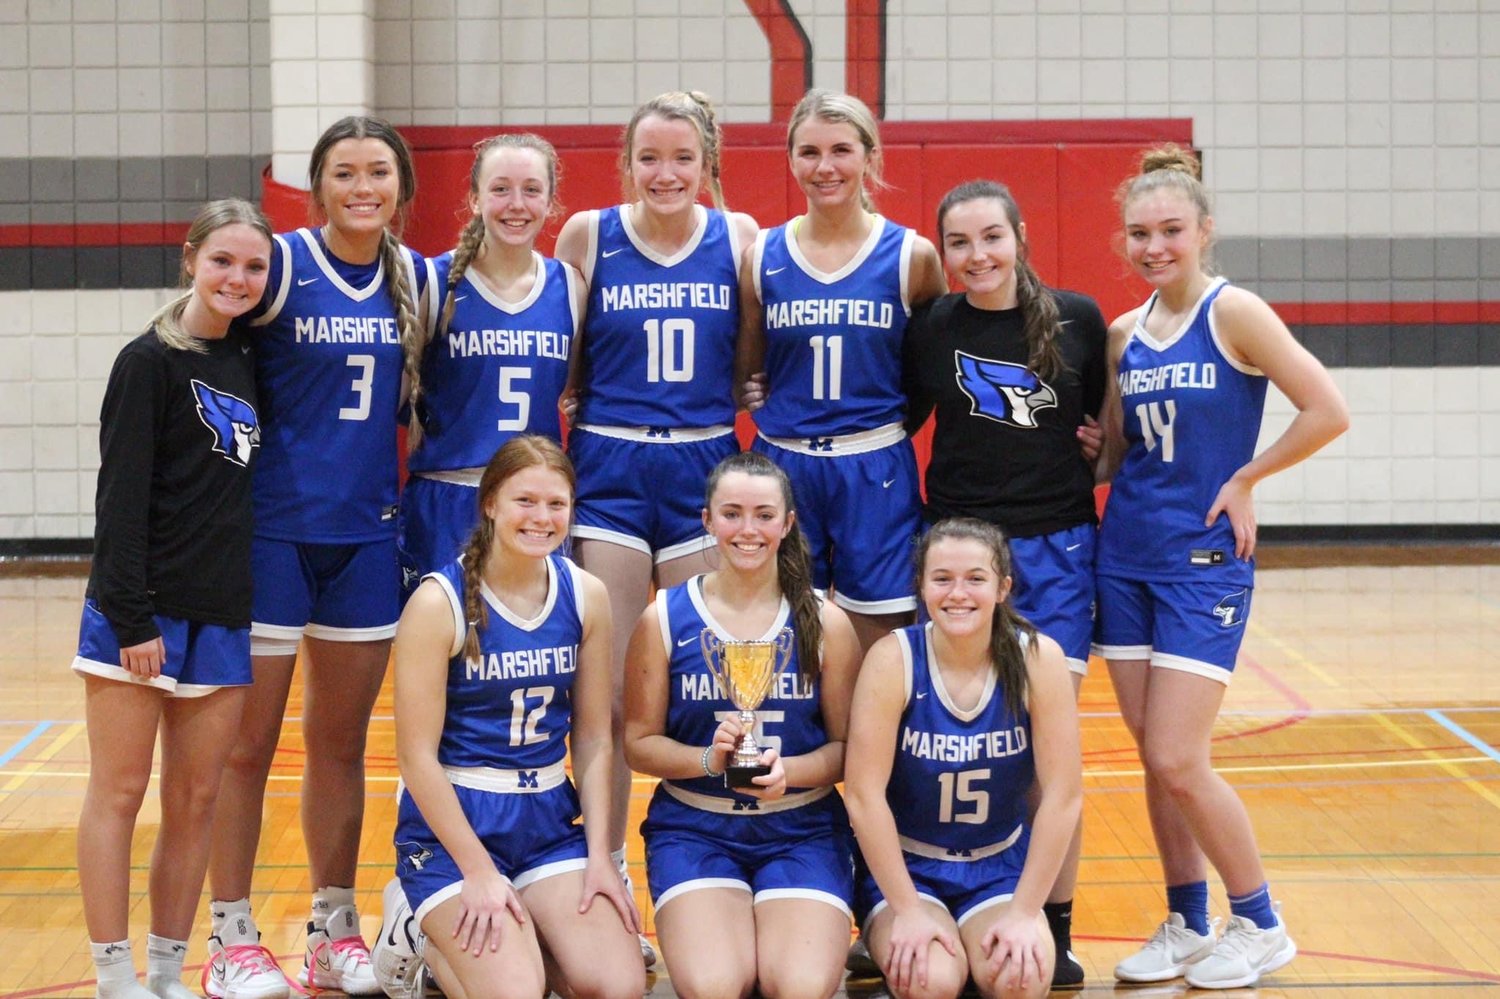 Marshfield Lady Jays with the consolation game hardware after defeating Catholic.